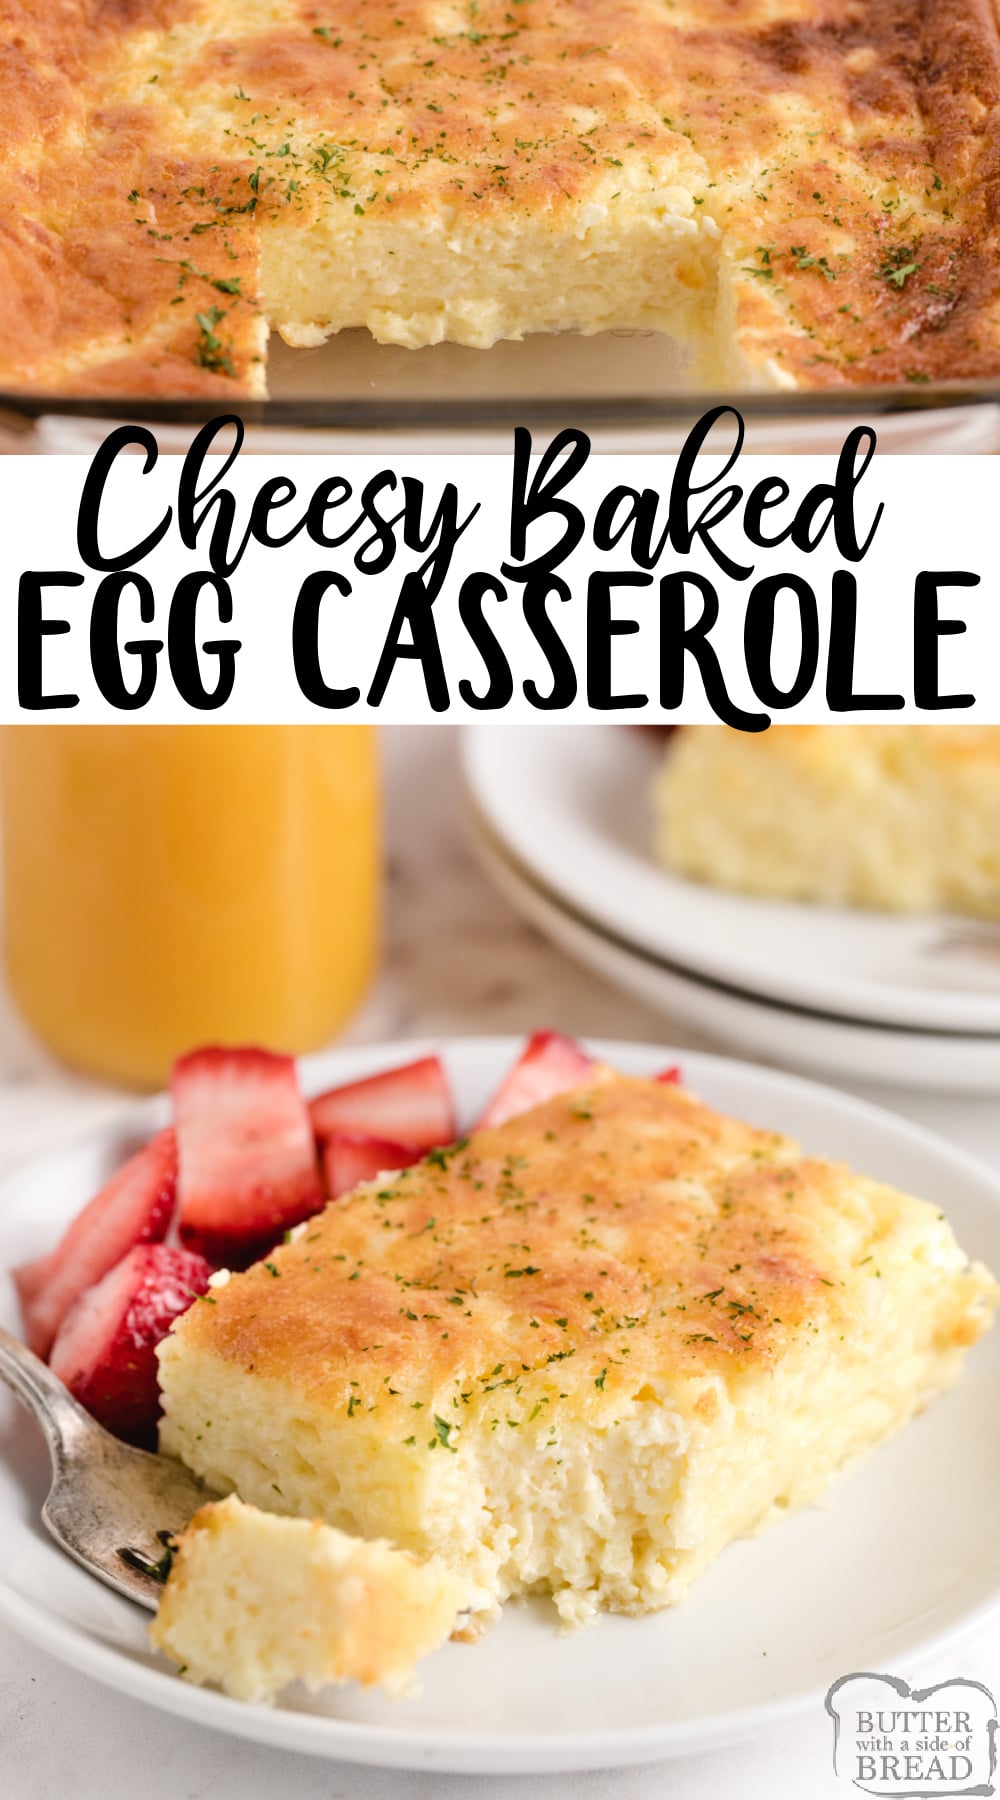 Cheesy Baked Egg Casserole made with eggs, milk and three different kinds of cheese. Perfect baked breakfast casserole recipe with tons of protein!